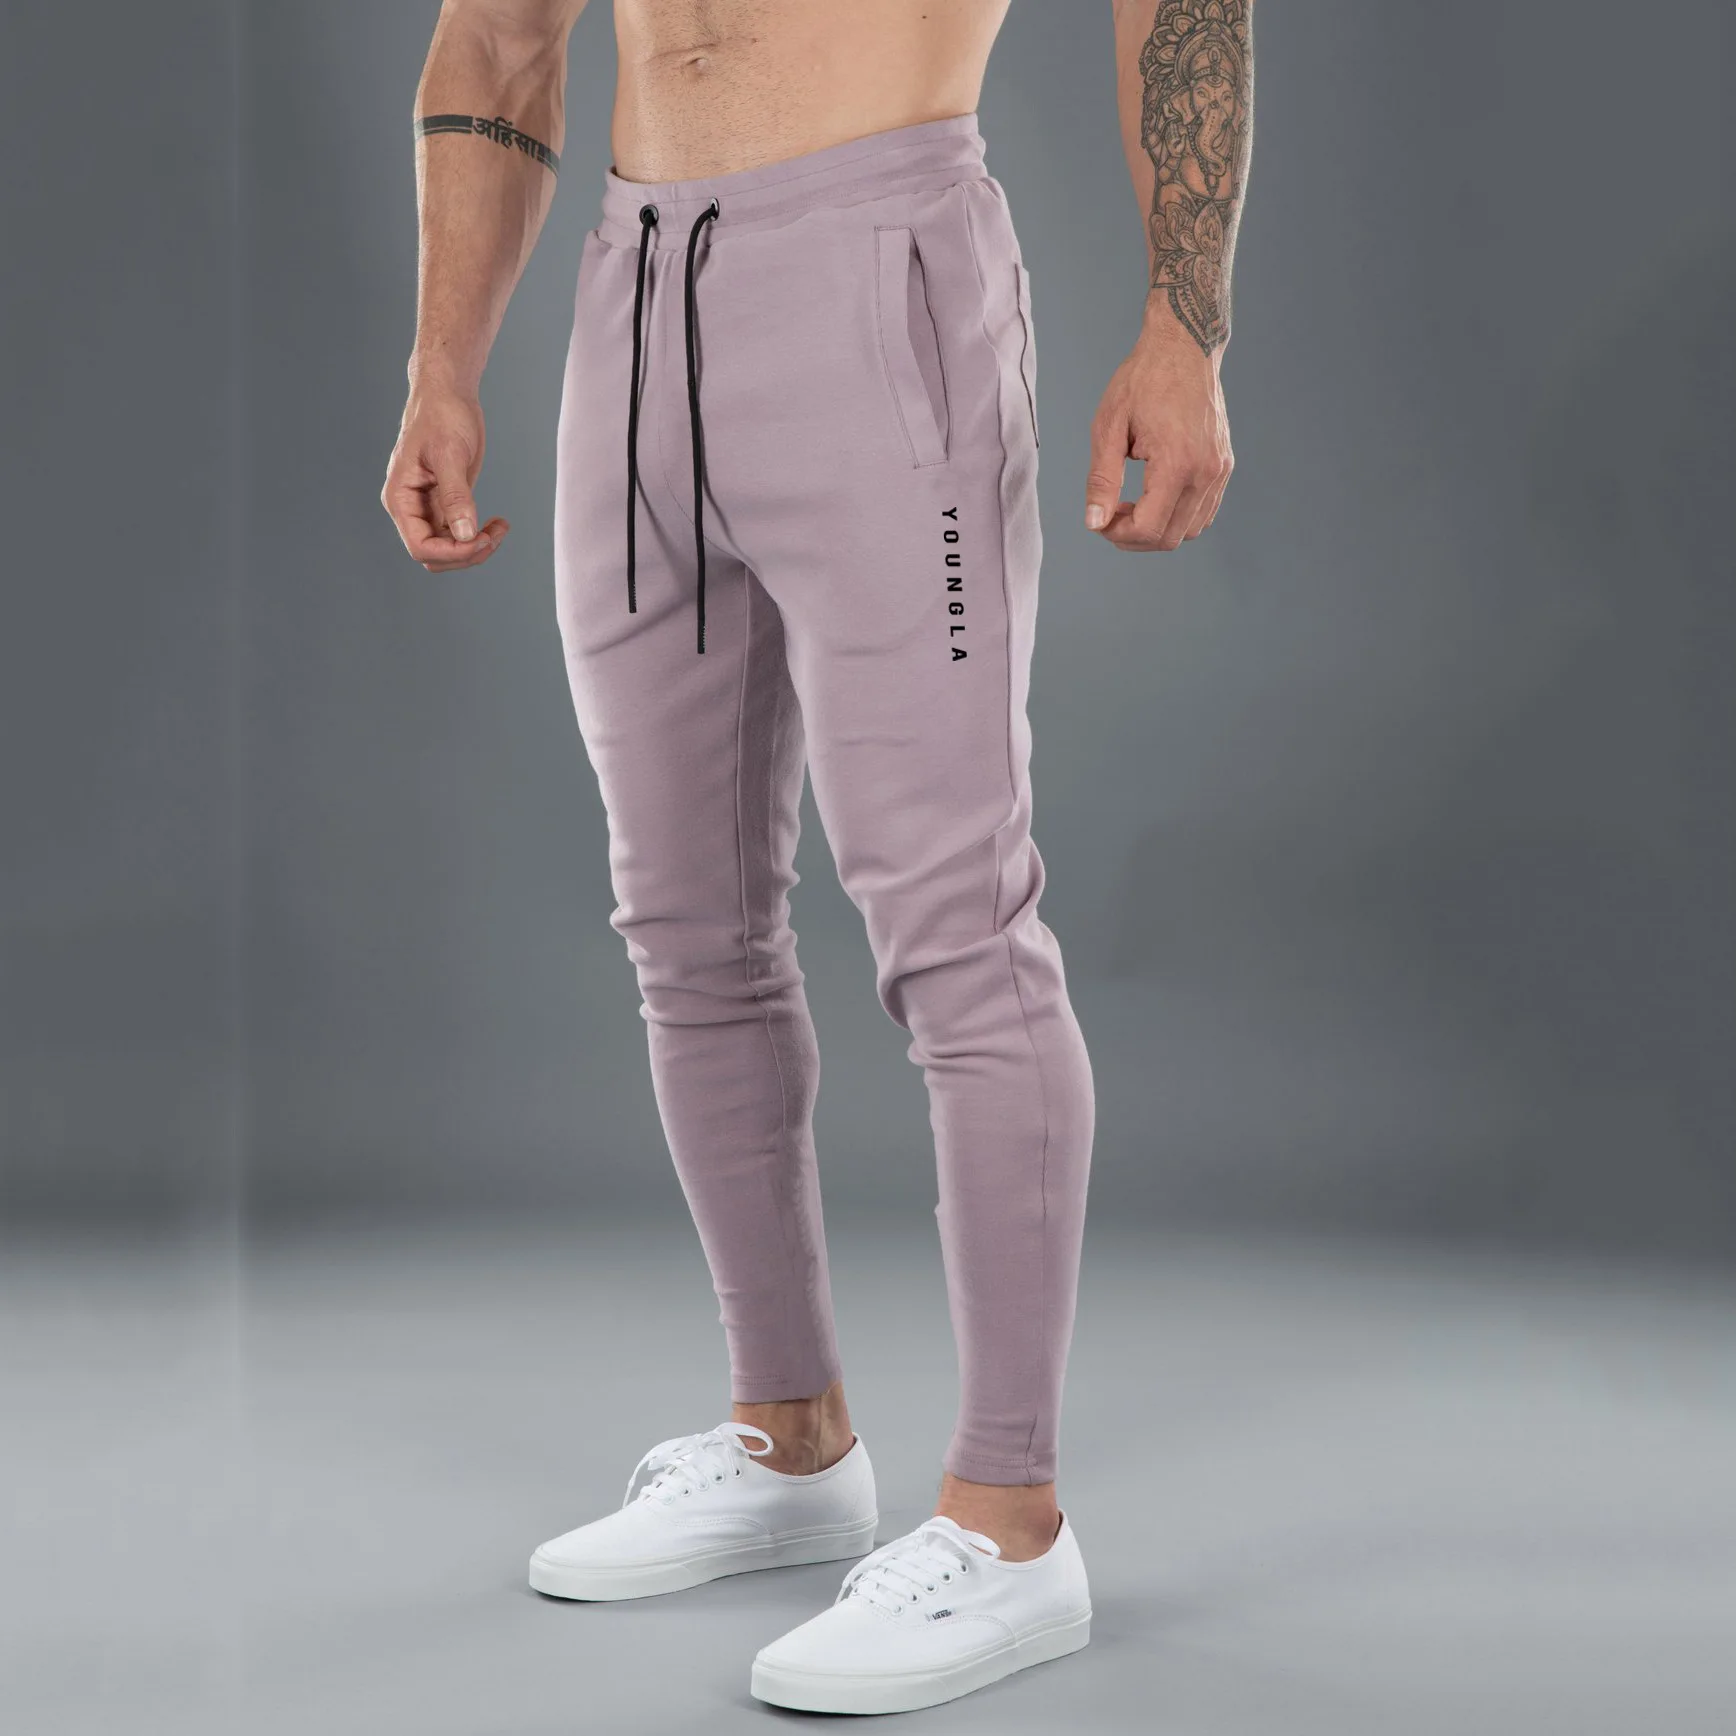 YoungLA Mens Joggers Slim Fit, Gym Pants Tapered, Workout Skinny  Sweatpants